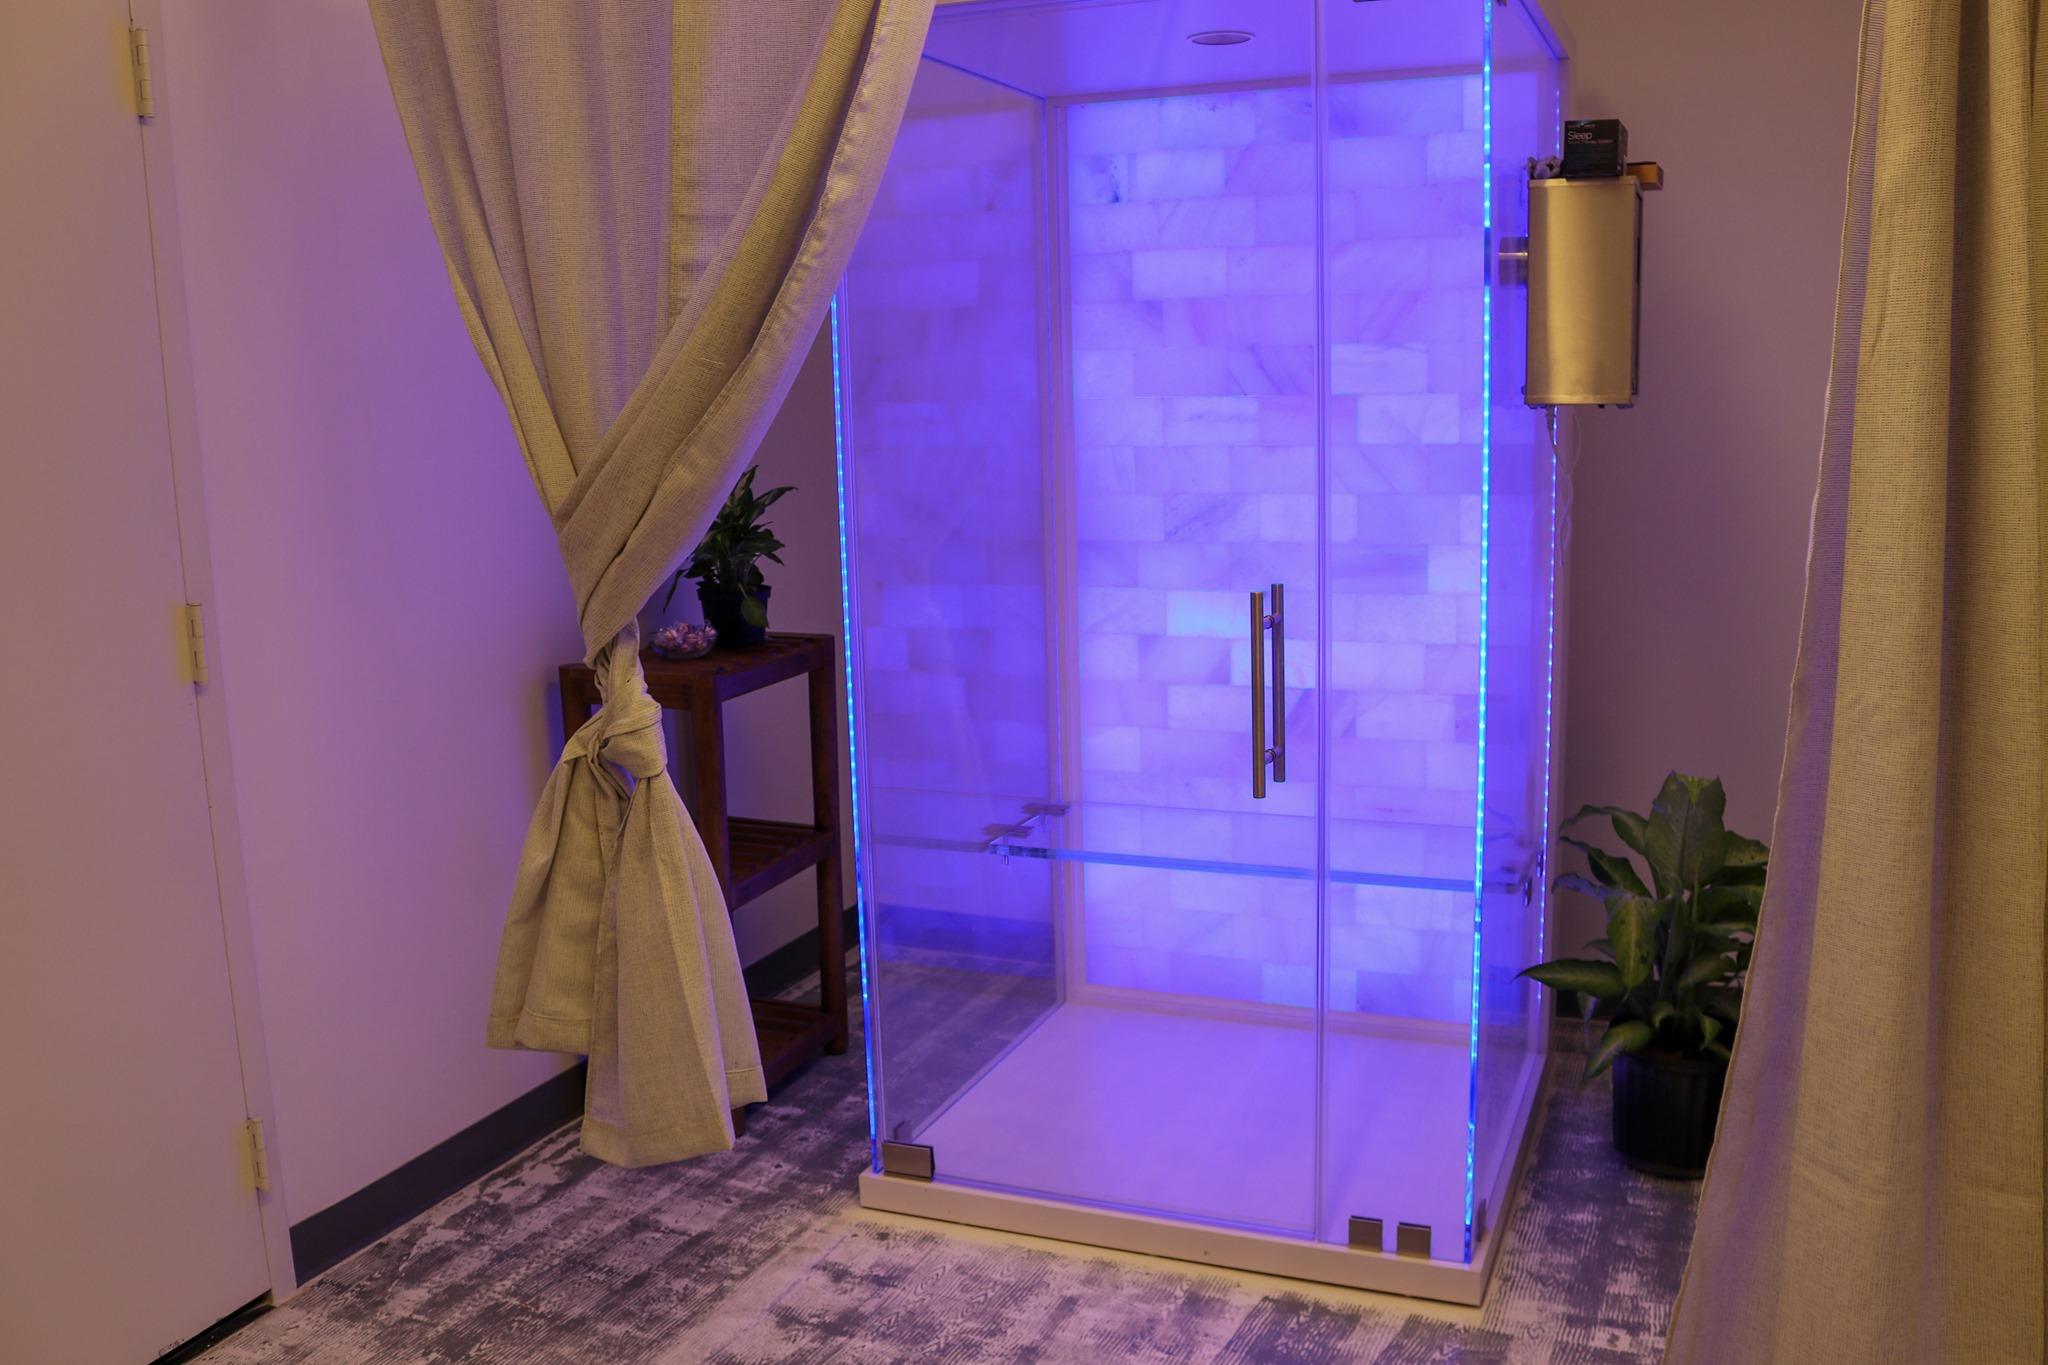 Glass salt therapy booth with a white salt wall and purple LED lights on a white and grey carpet.